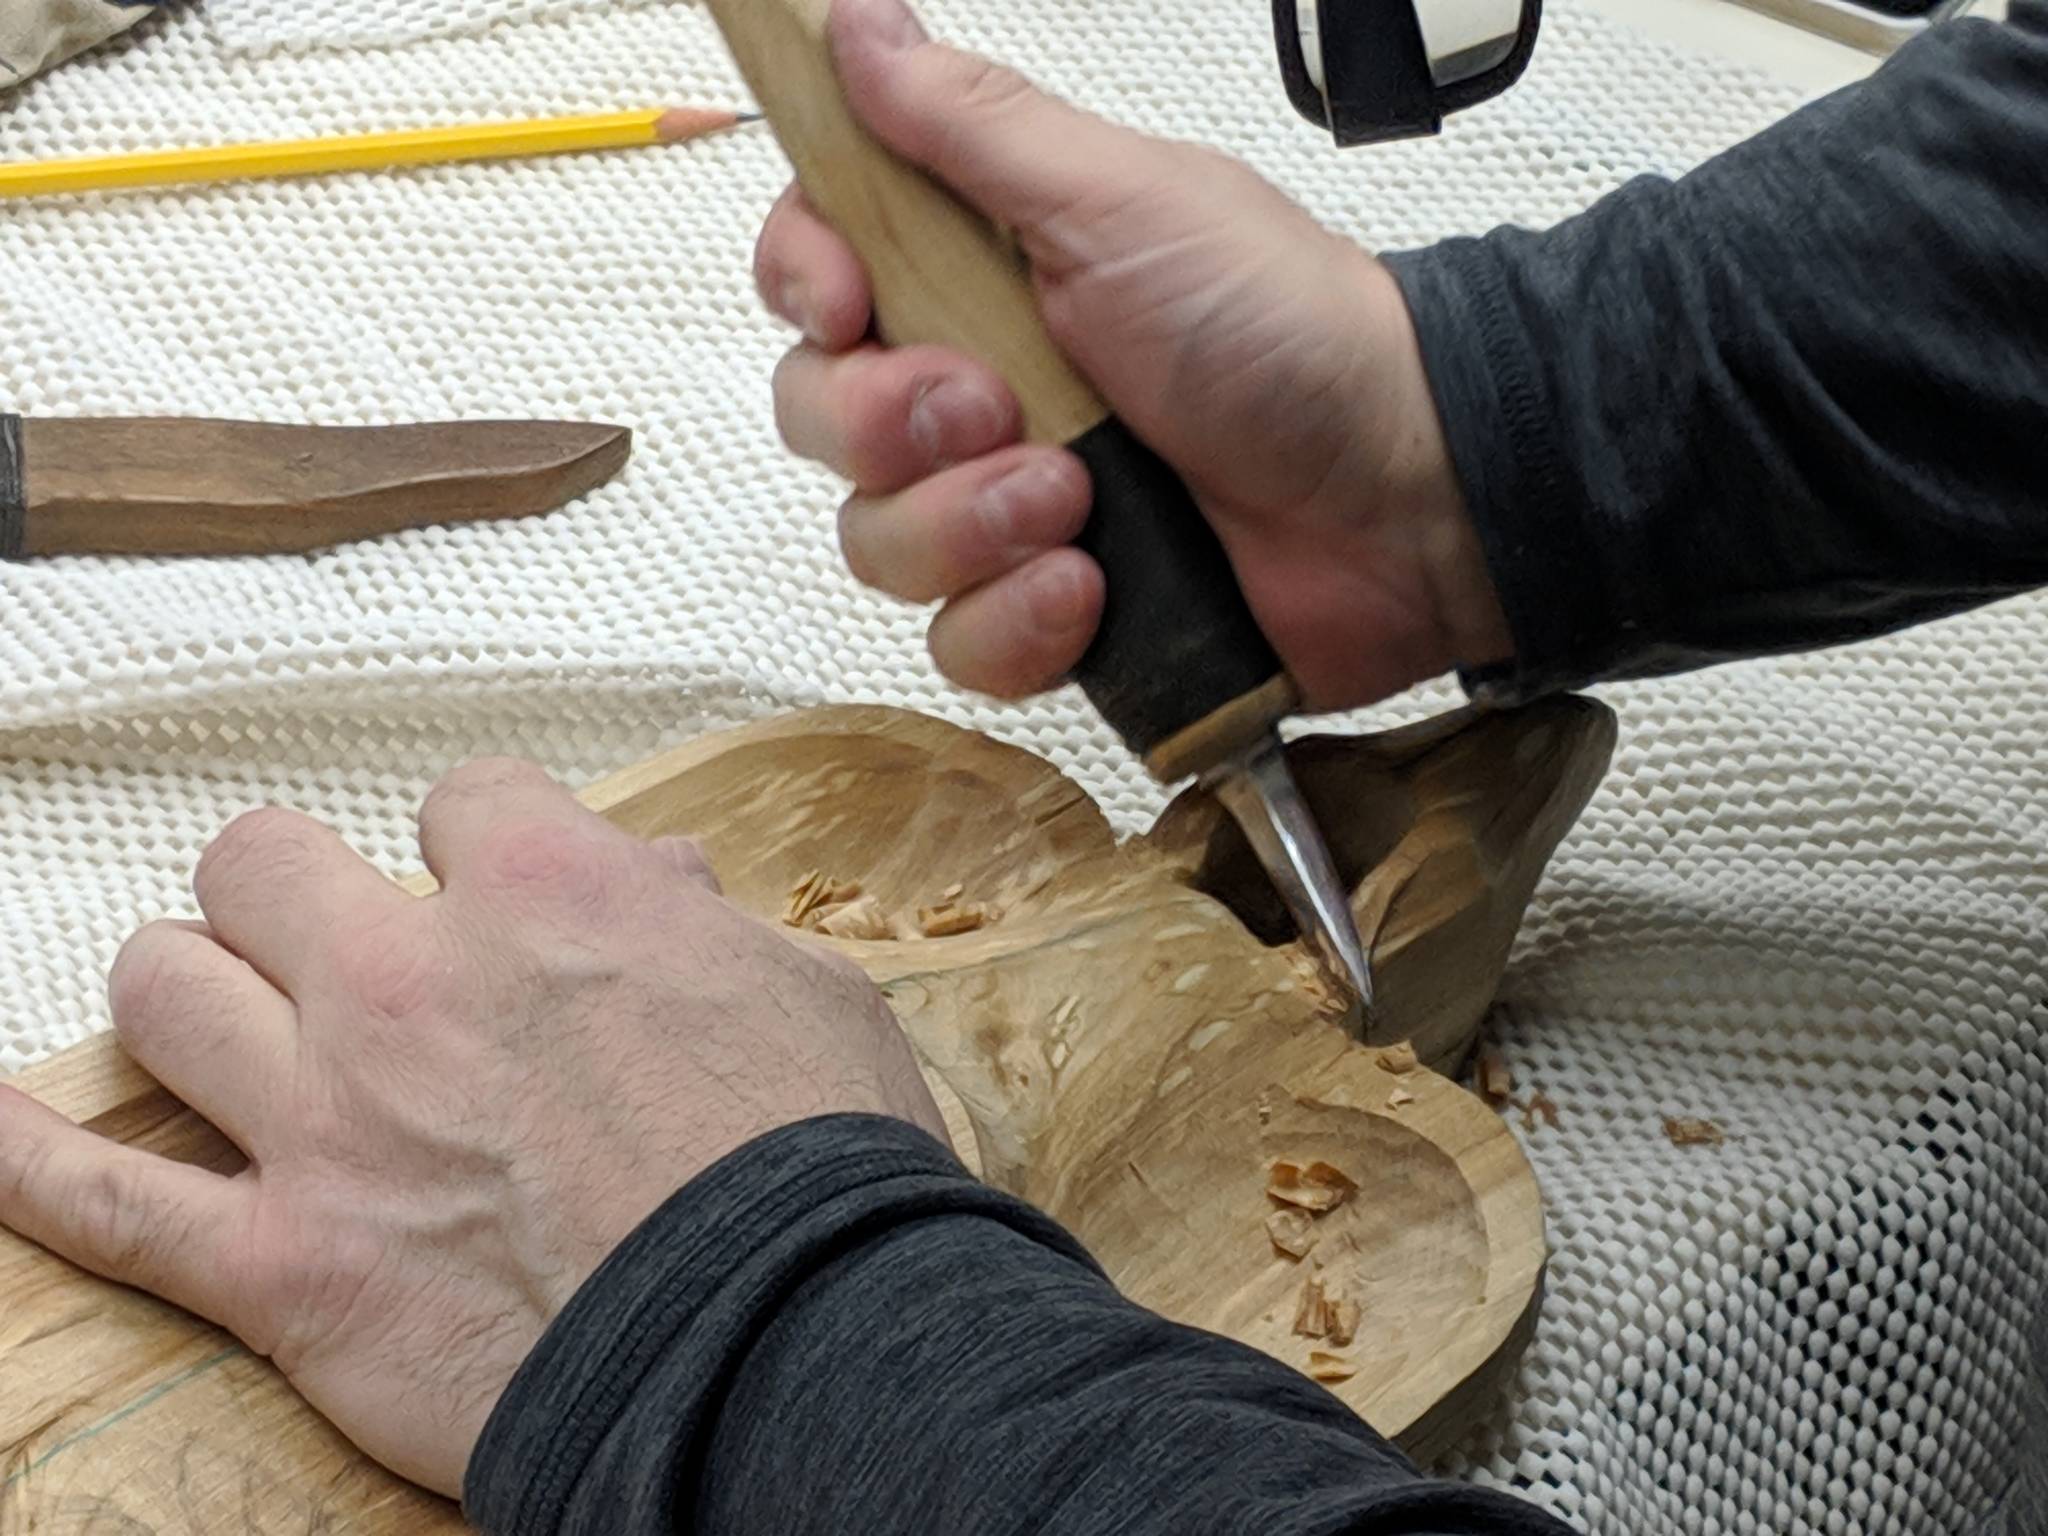 Doug Gray works on a lovebirds bowl Saturday, Jan. 12, 2019. Gray has been carving since he came to Juneau from Sitka in the early ’00s. (Ben Hohenstatt | Capital City Weekly)